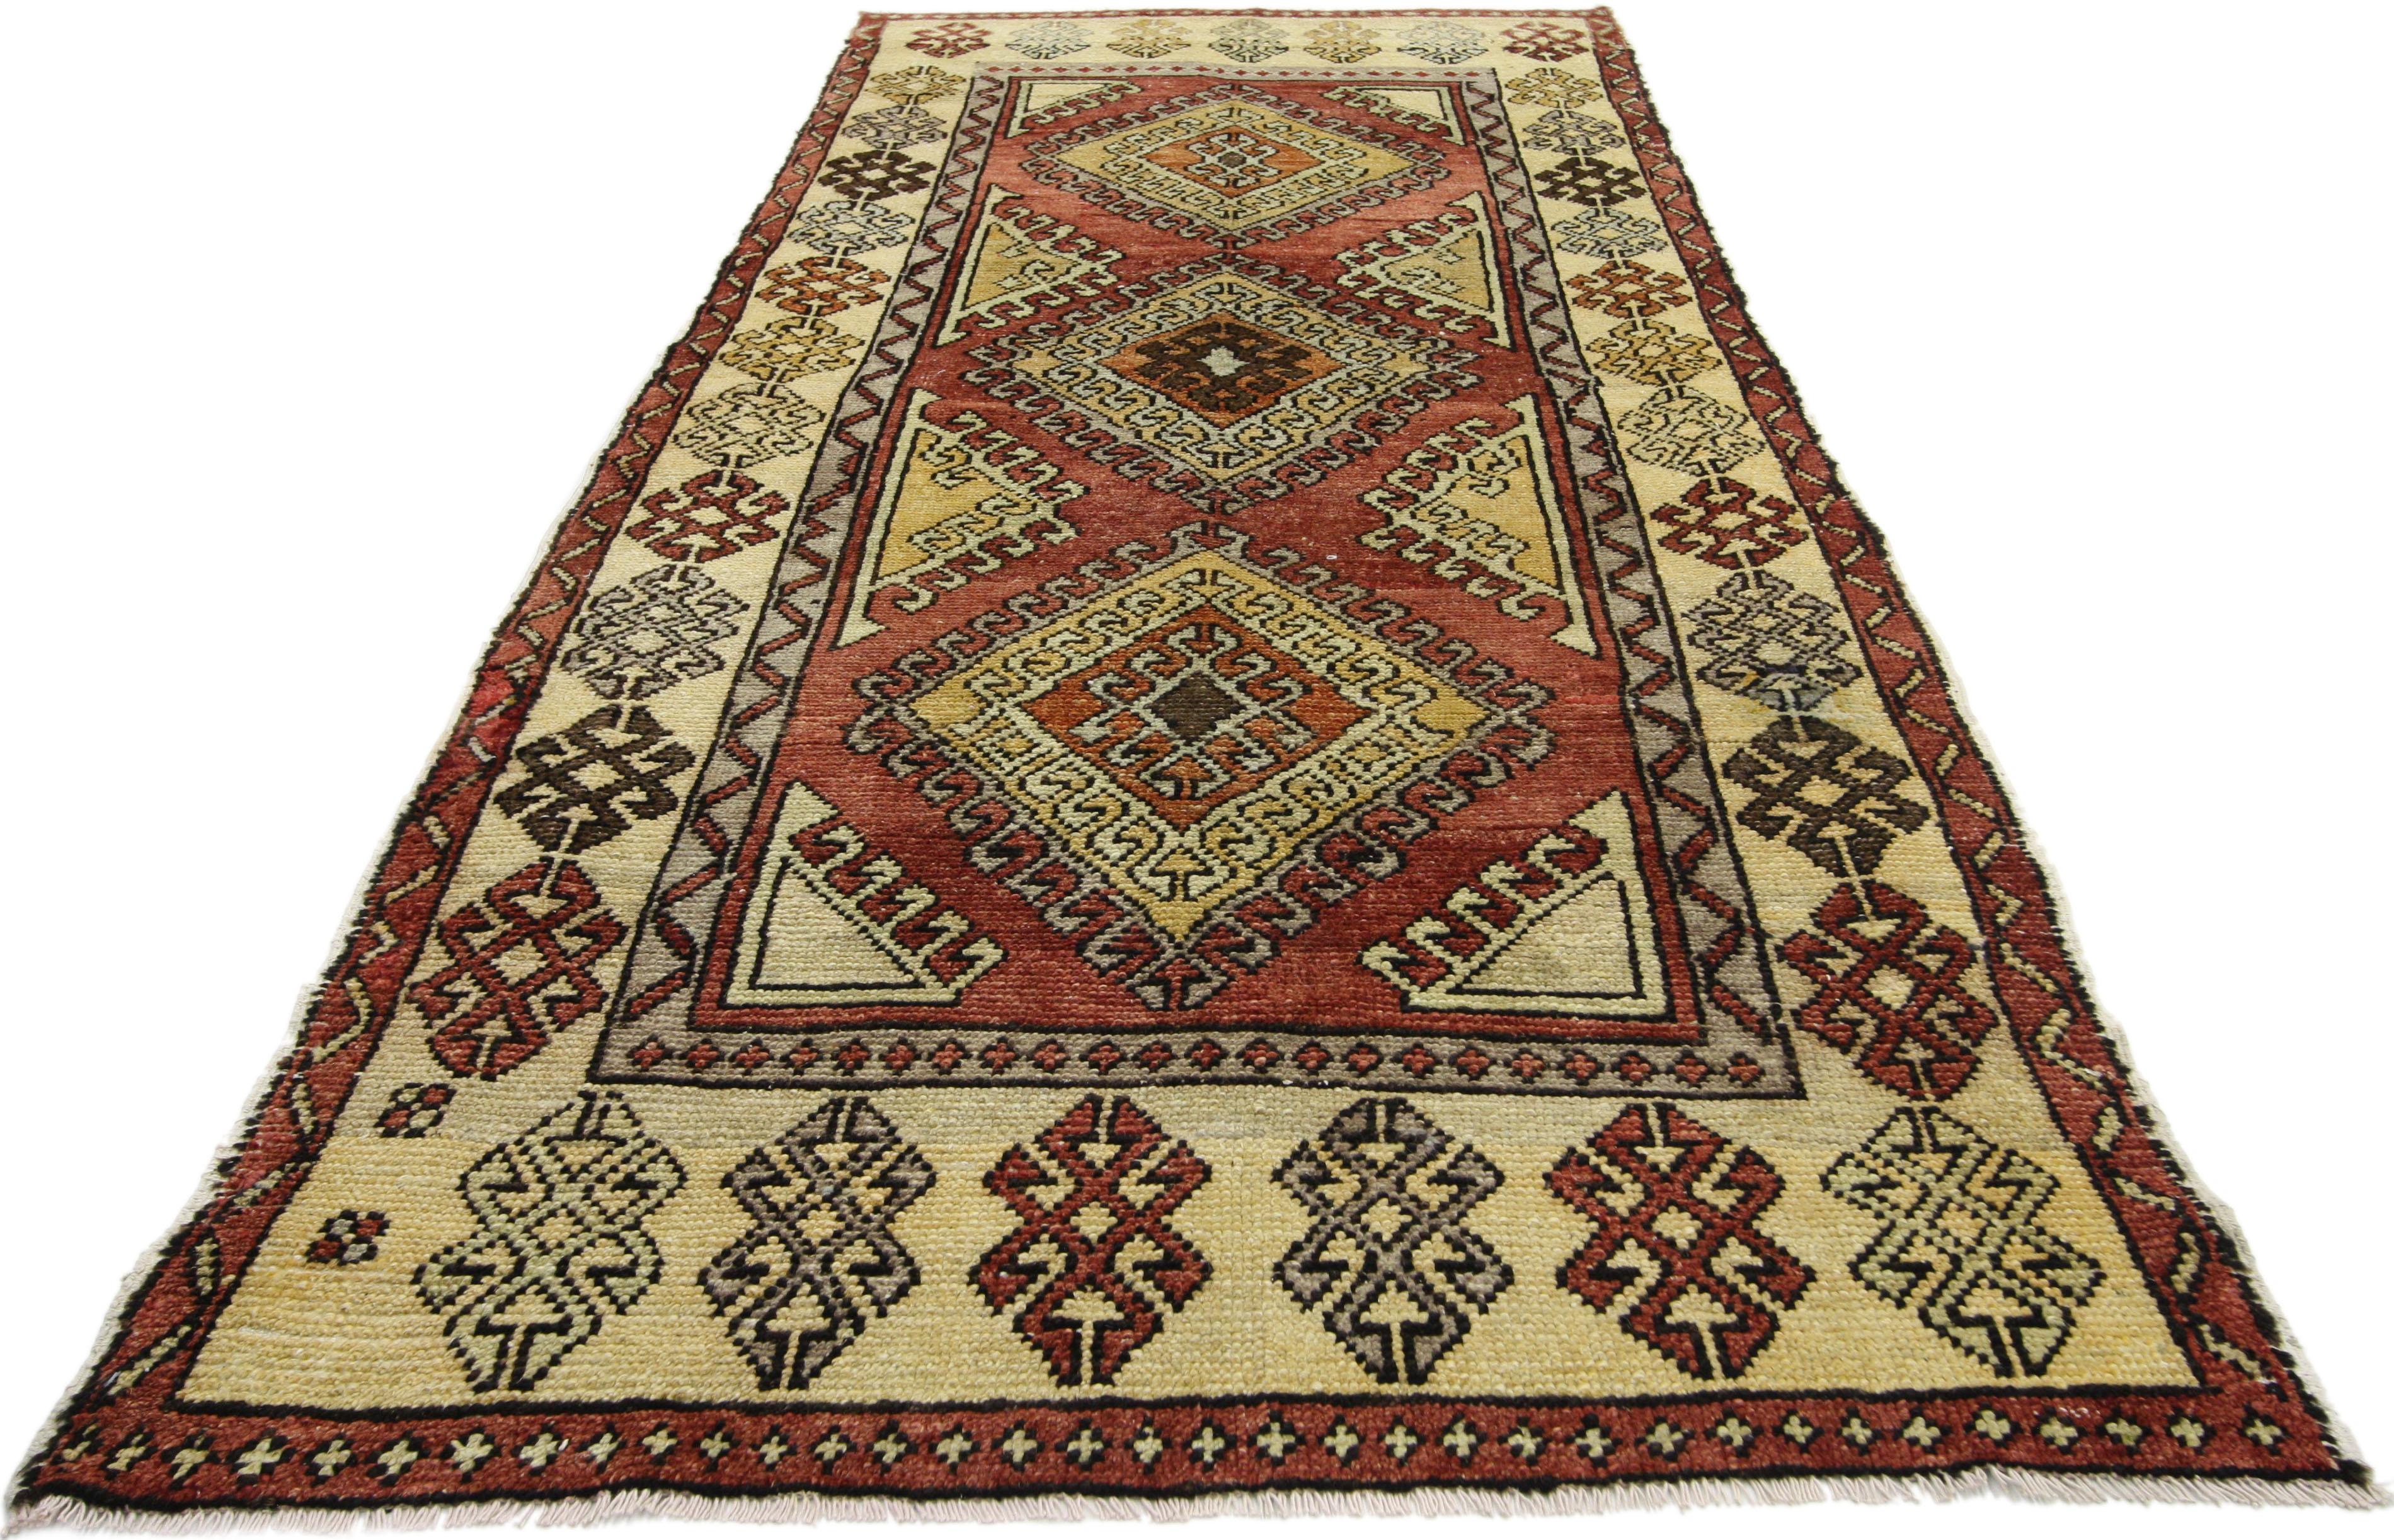 Pair of Vintage Turkish Oushak Runners, Matching Tribal Style Hallway Runners In Good Condition For Sale In Dallas, TX